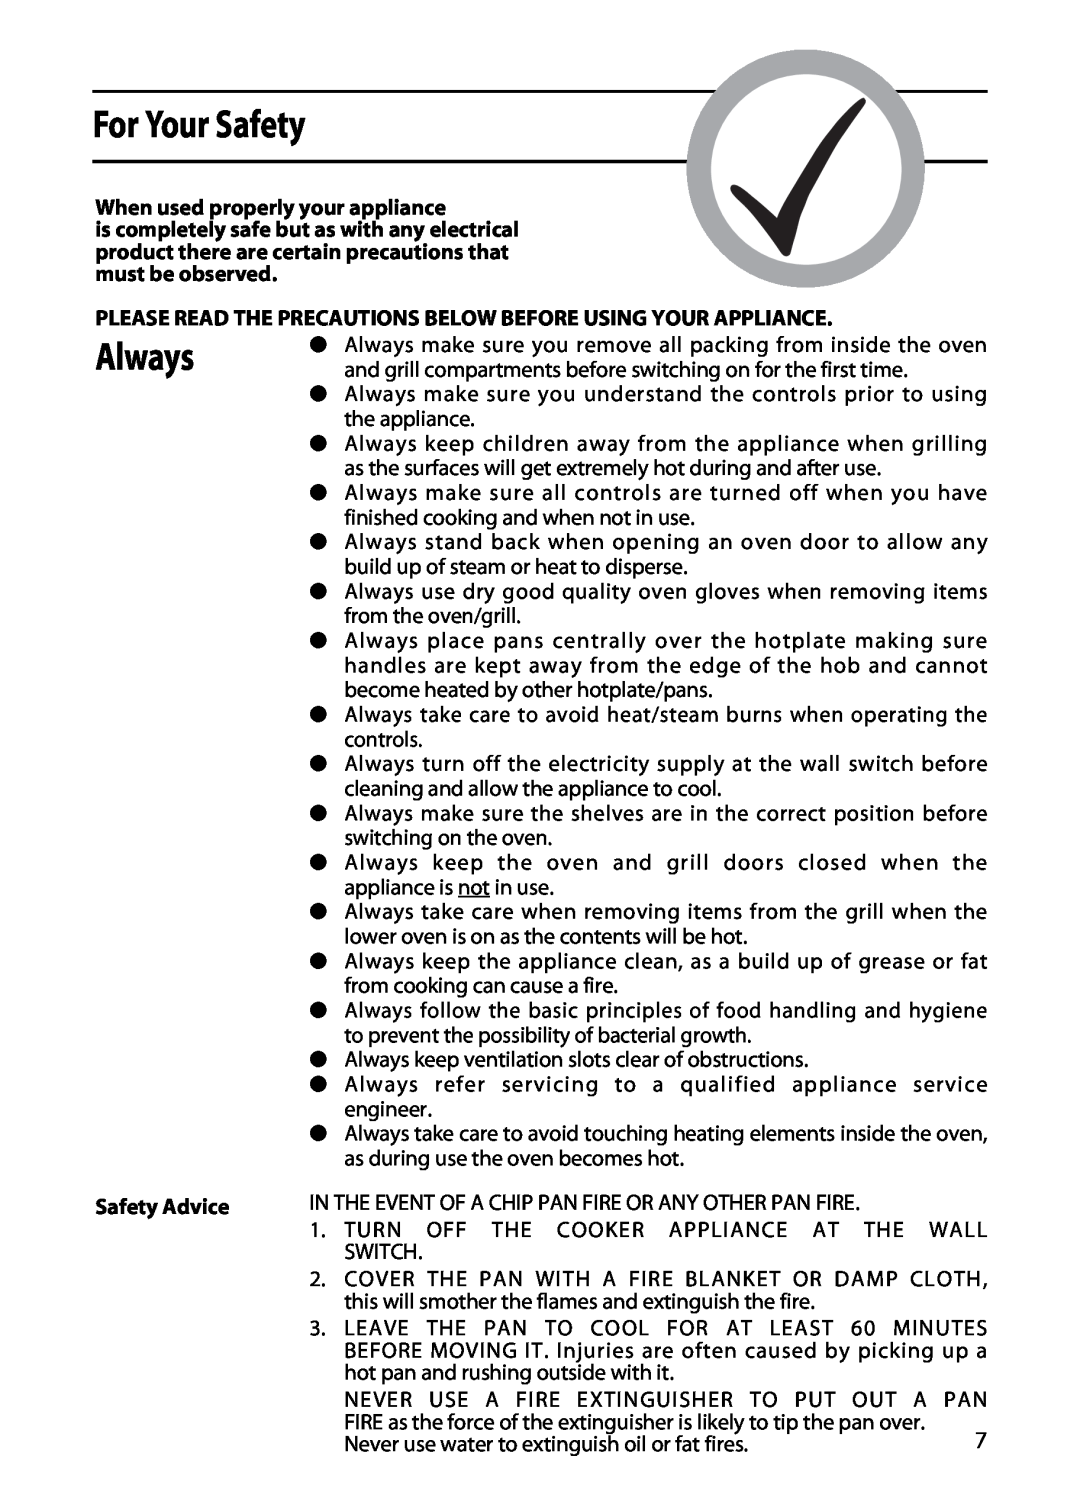 Hotpoint 50cm manual For Your Safety, Always, When used properly your appliance, Safety Advice 